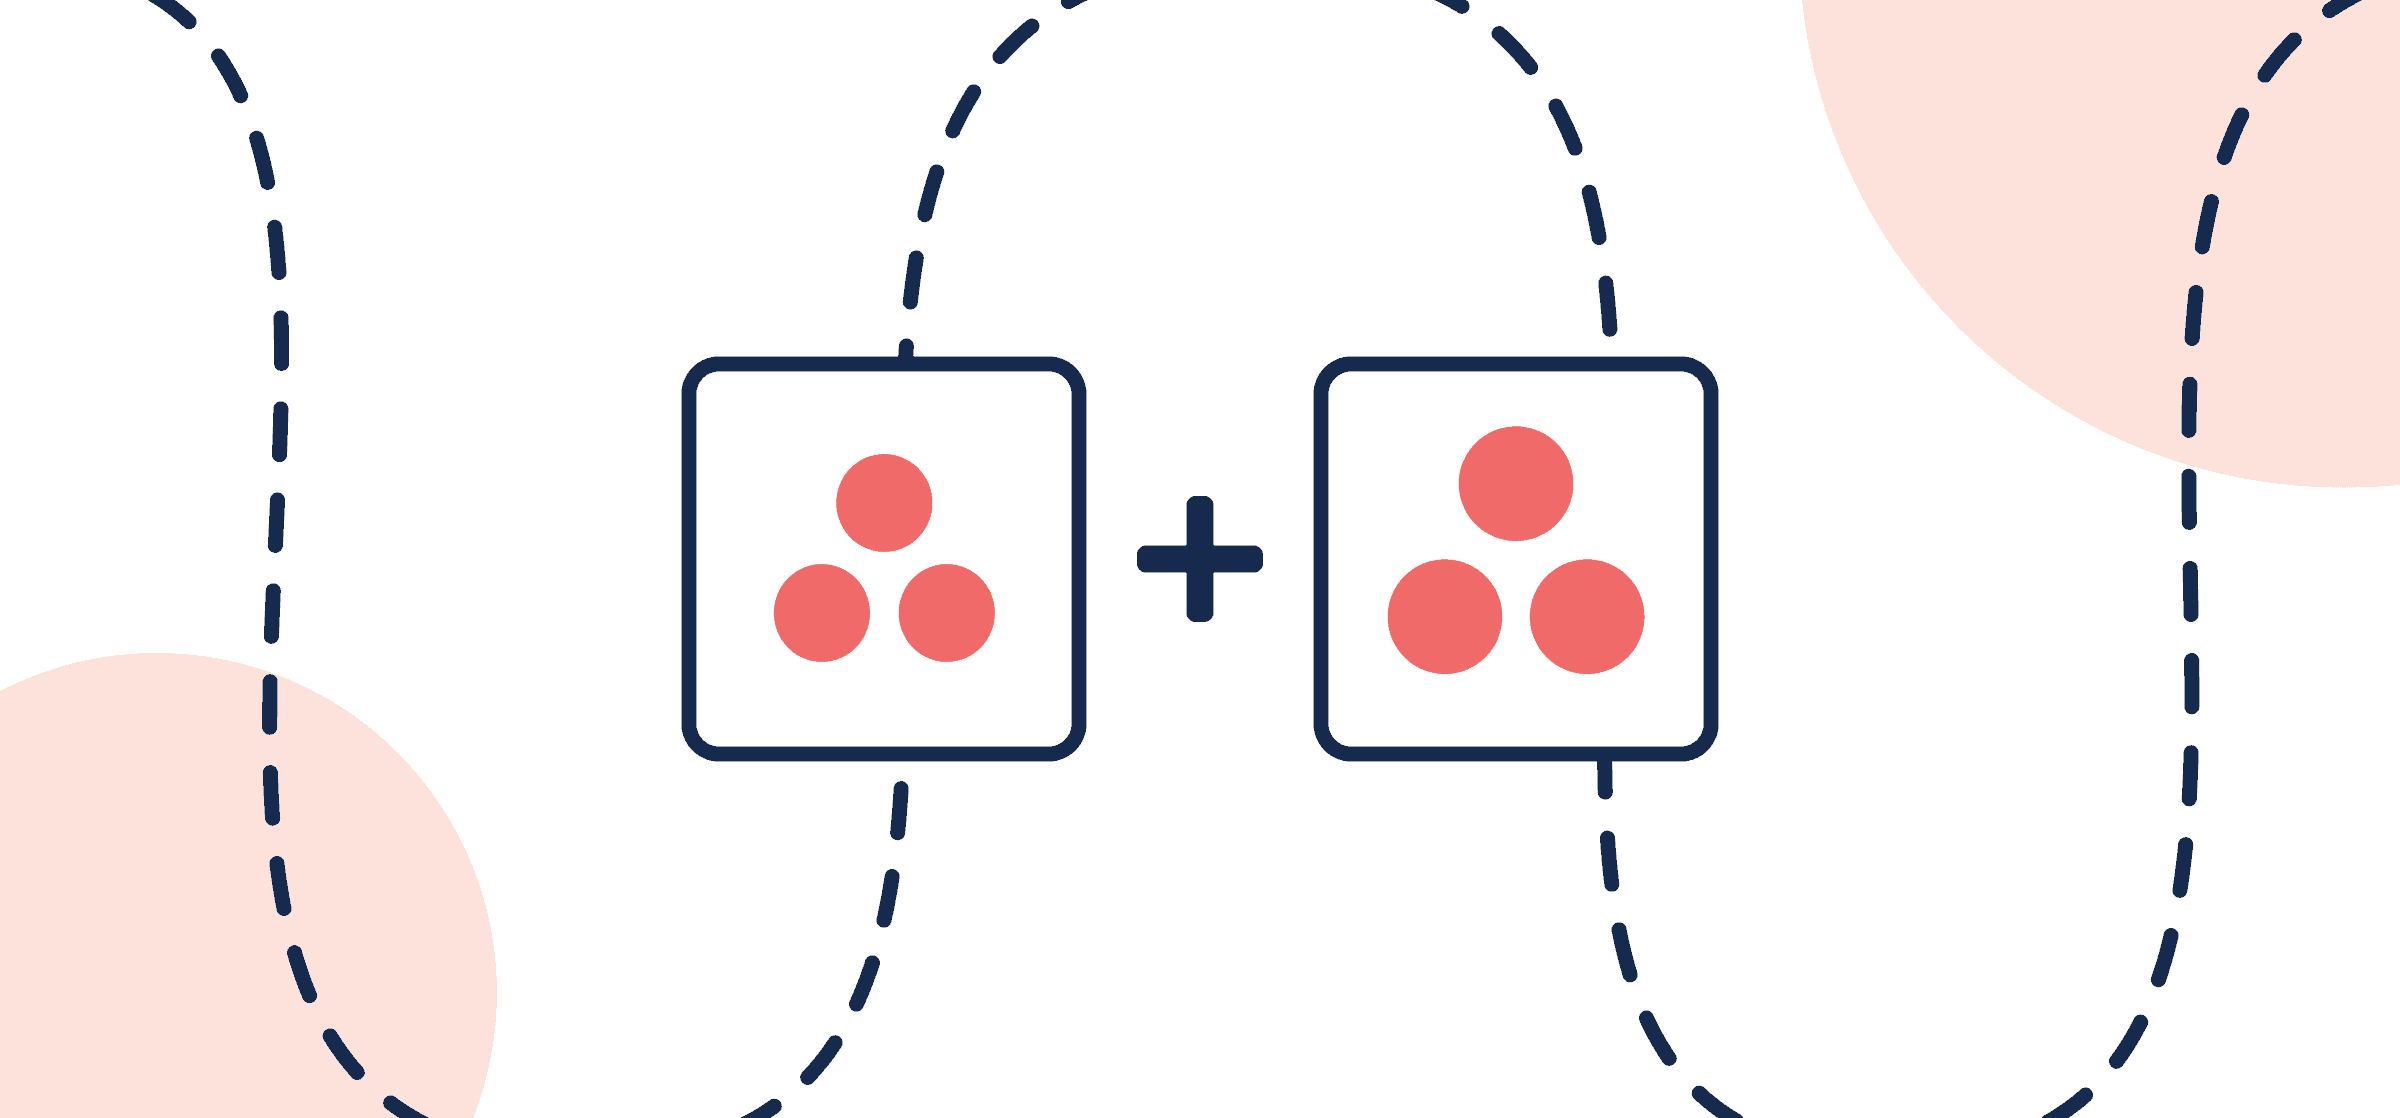 Featured image illustrating a step-by-step guide on syncing one Asana account to another through Unito, depicted by the connected Asana logos through circles and dotted lines.